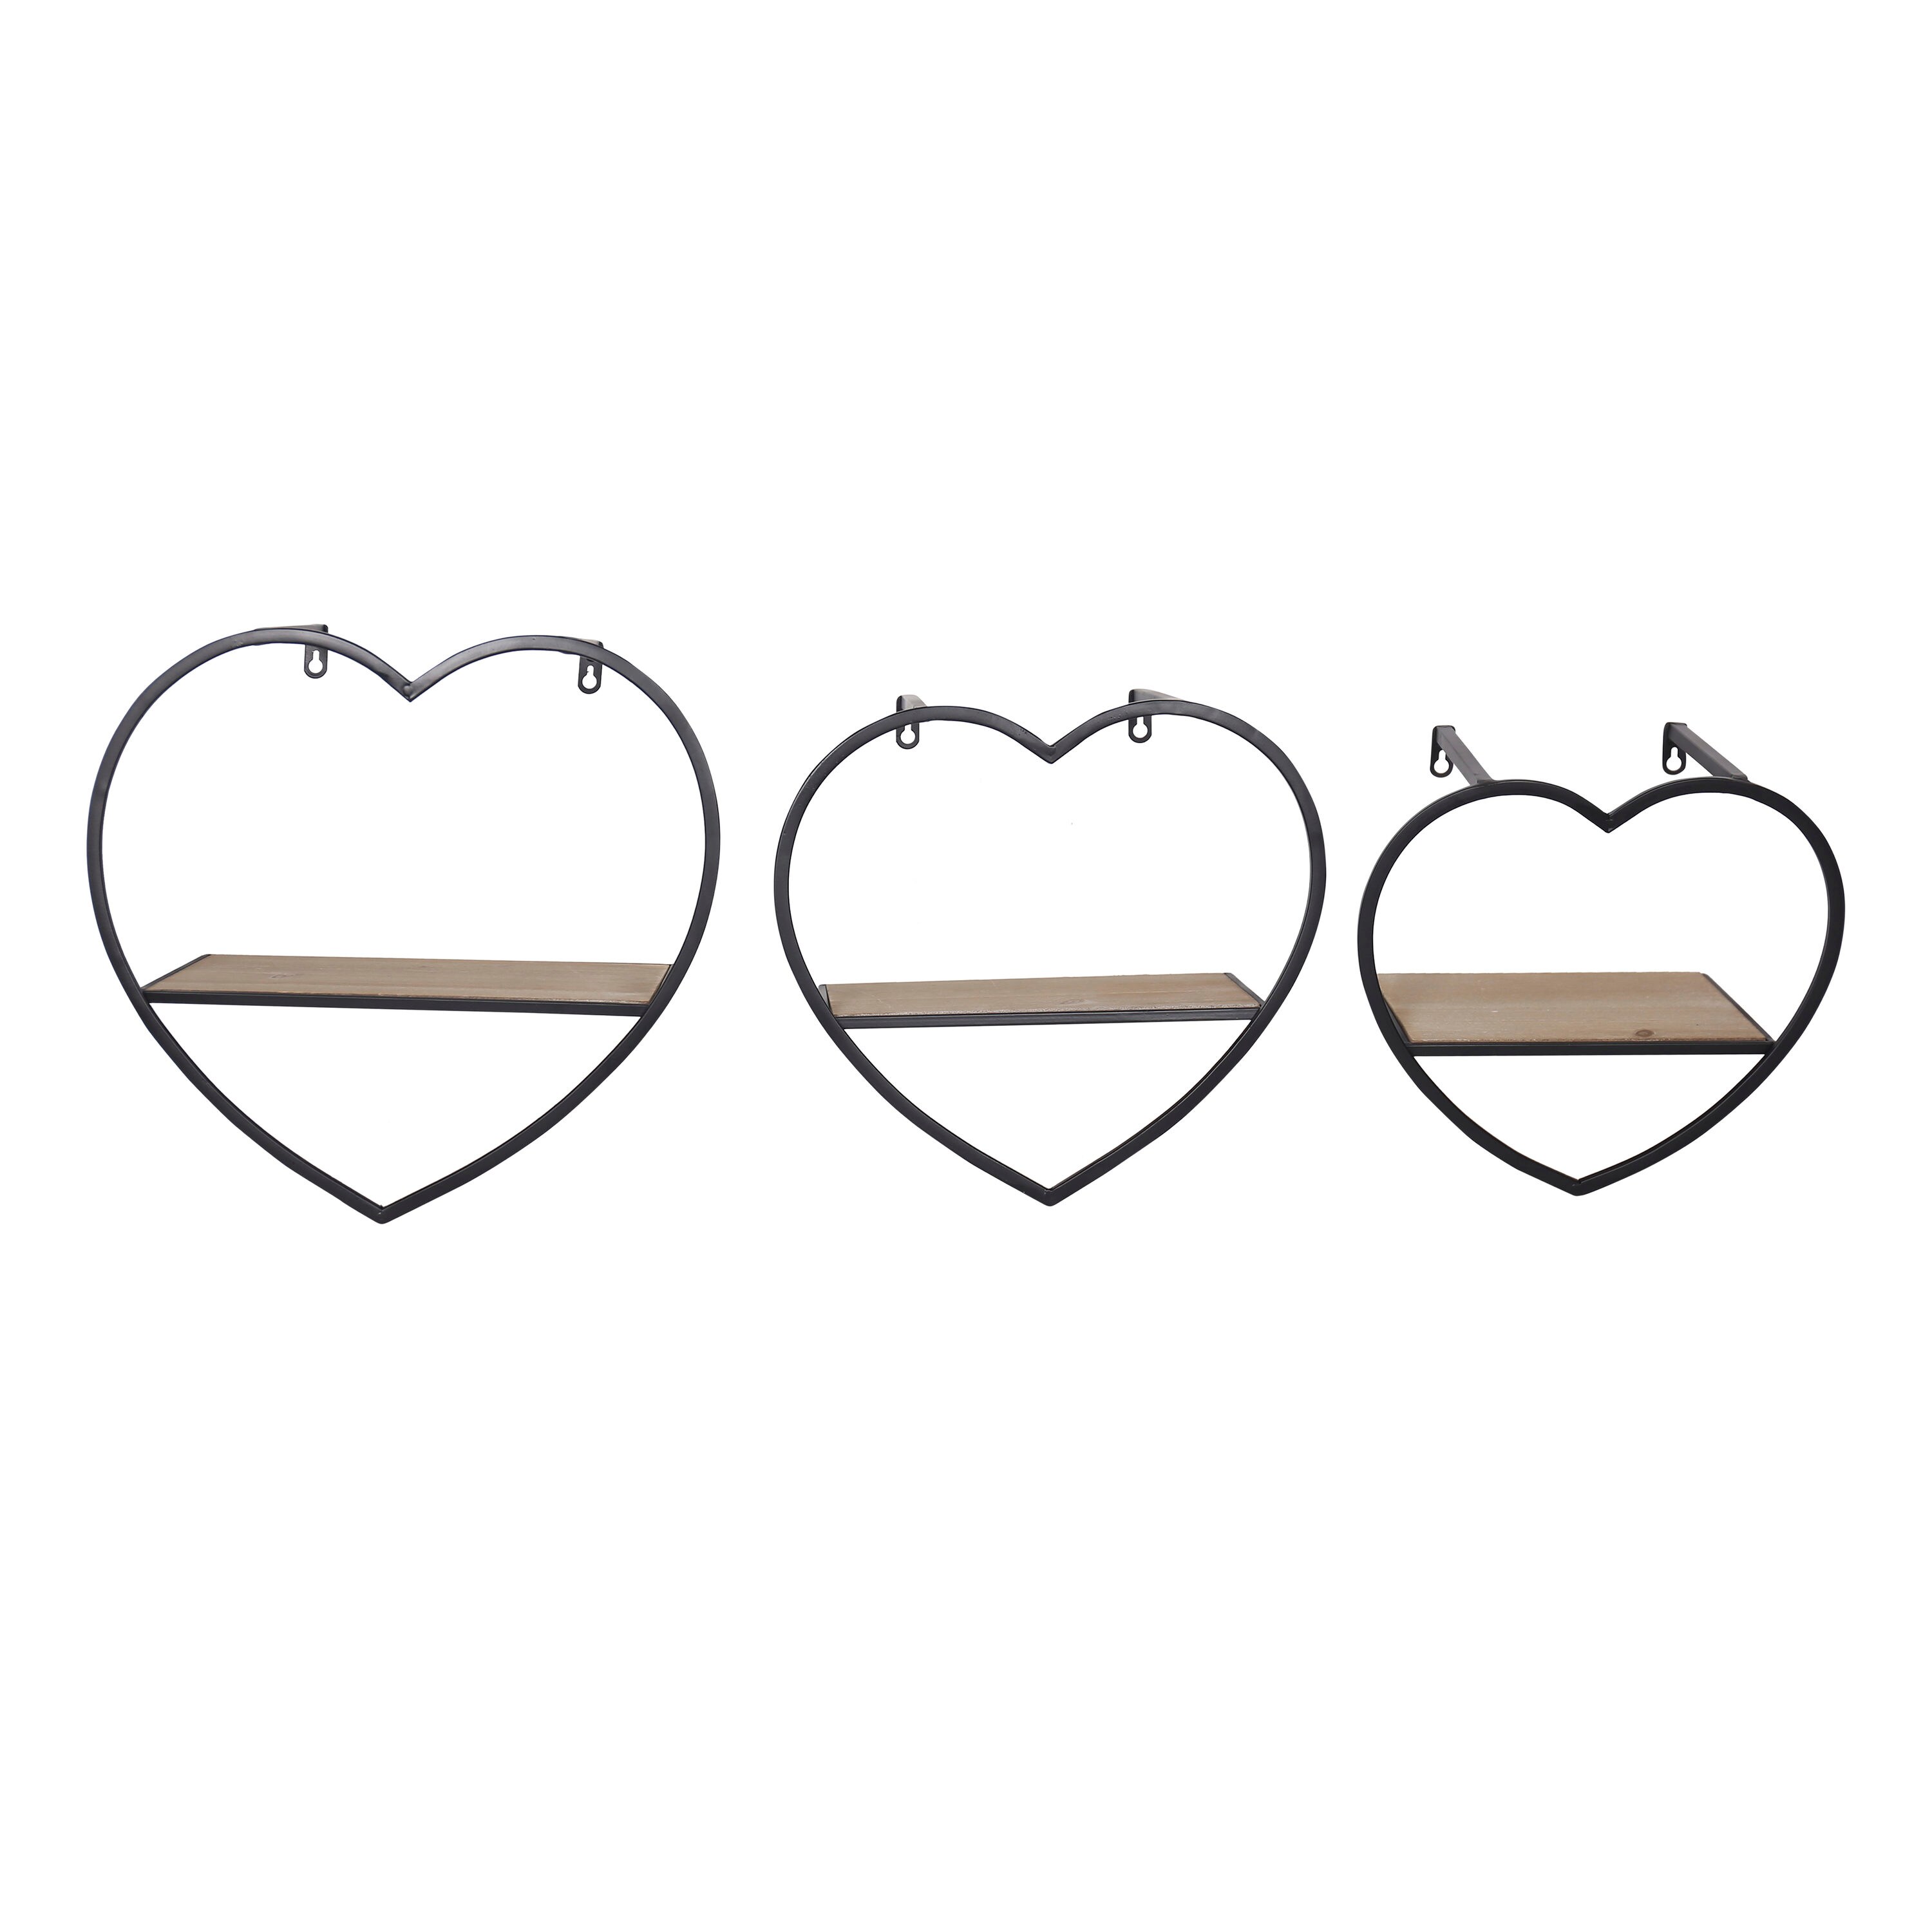  Metal Heart Wall Decor, 16, White Sold by at Home